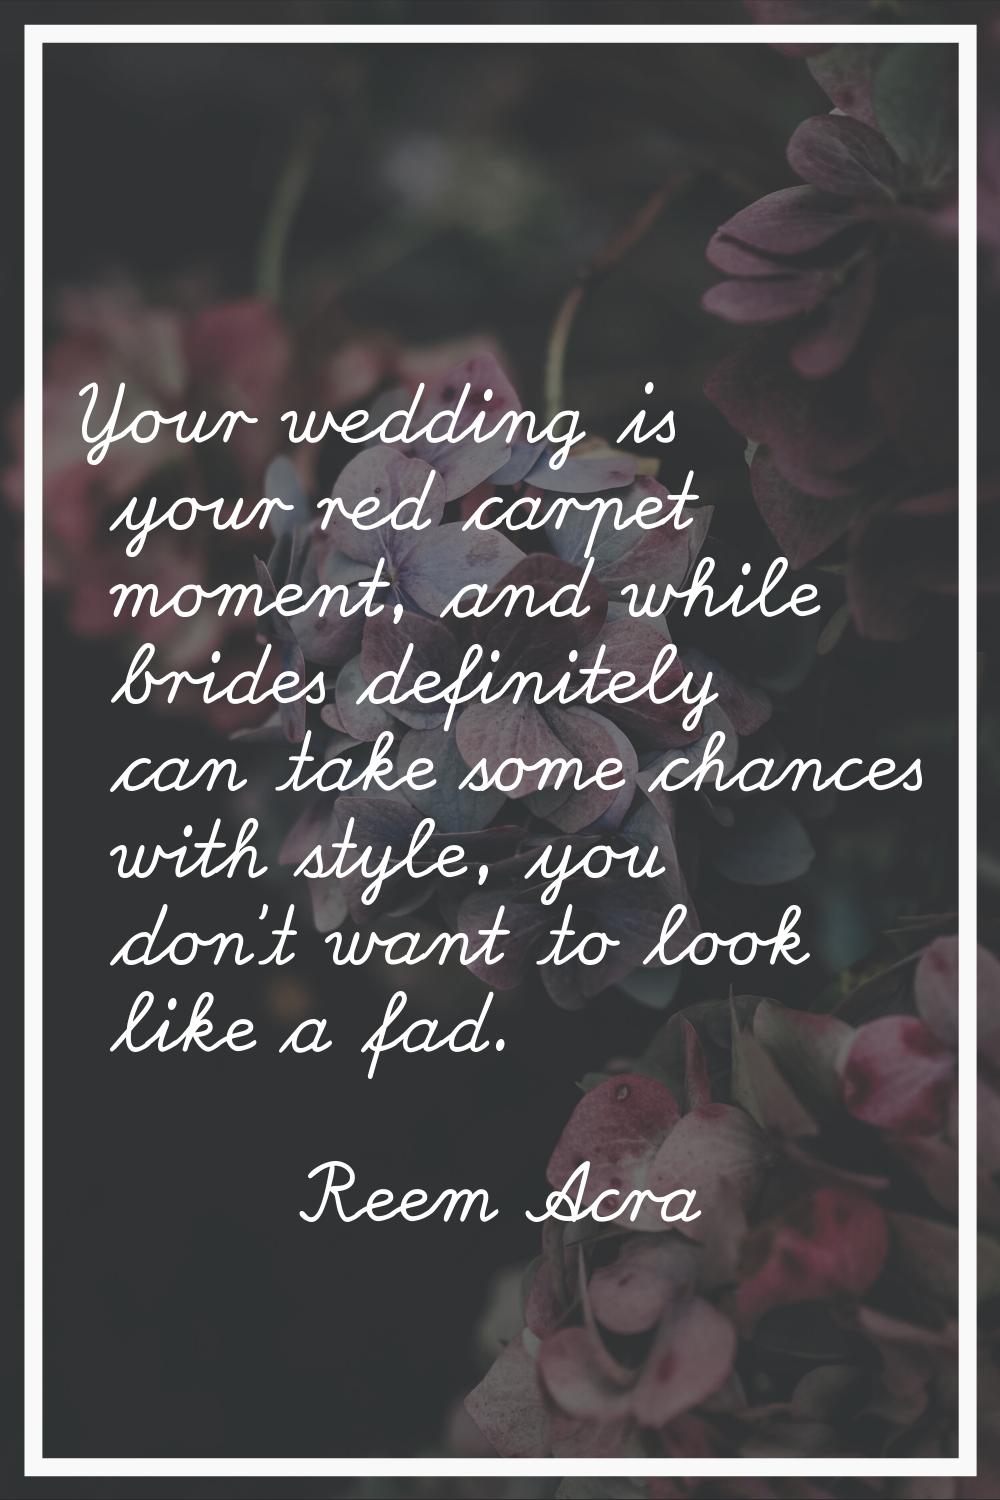 Your wedding is your red carpet moment, and while brides definitely can take some chances with styl